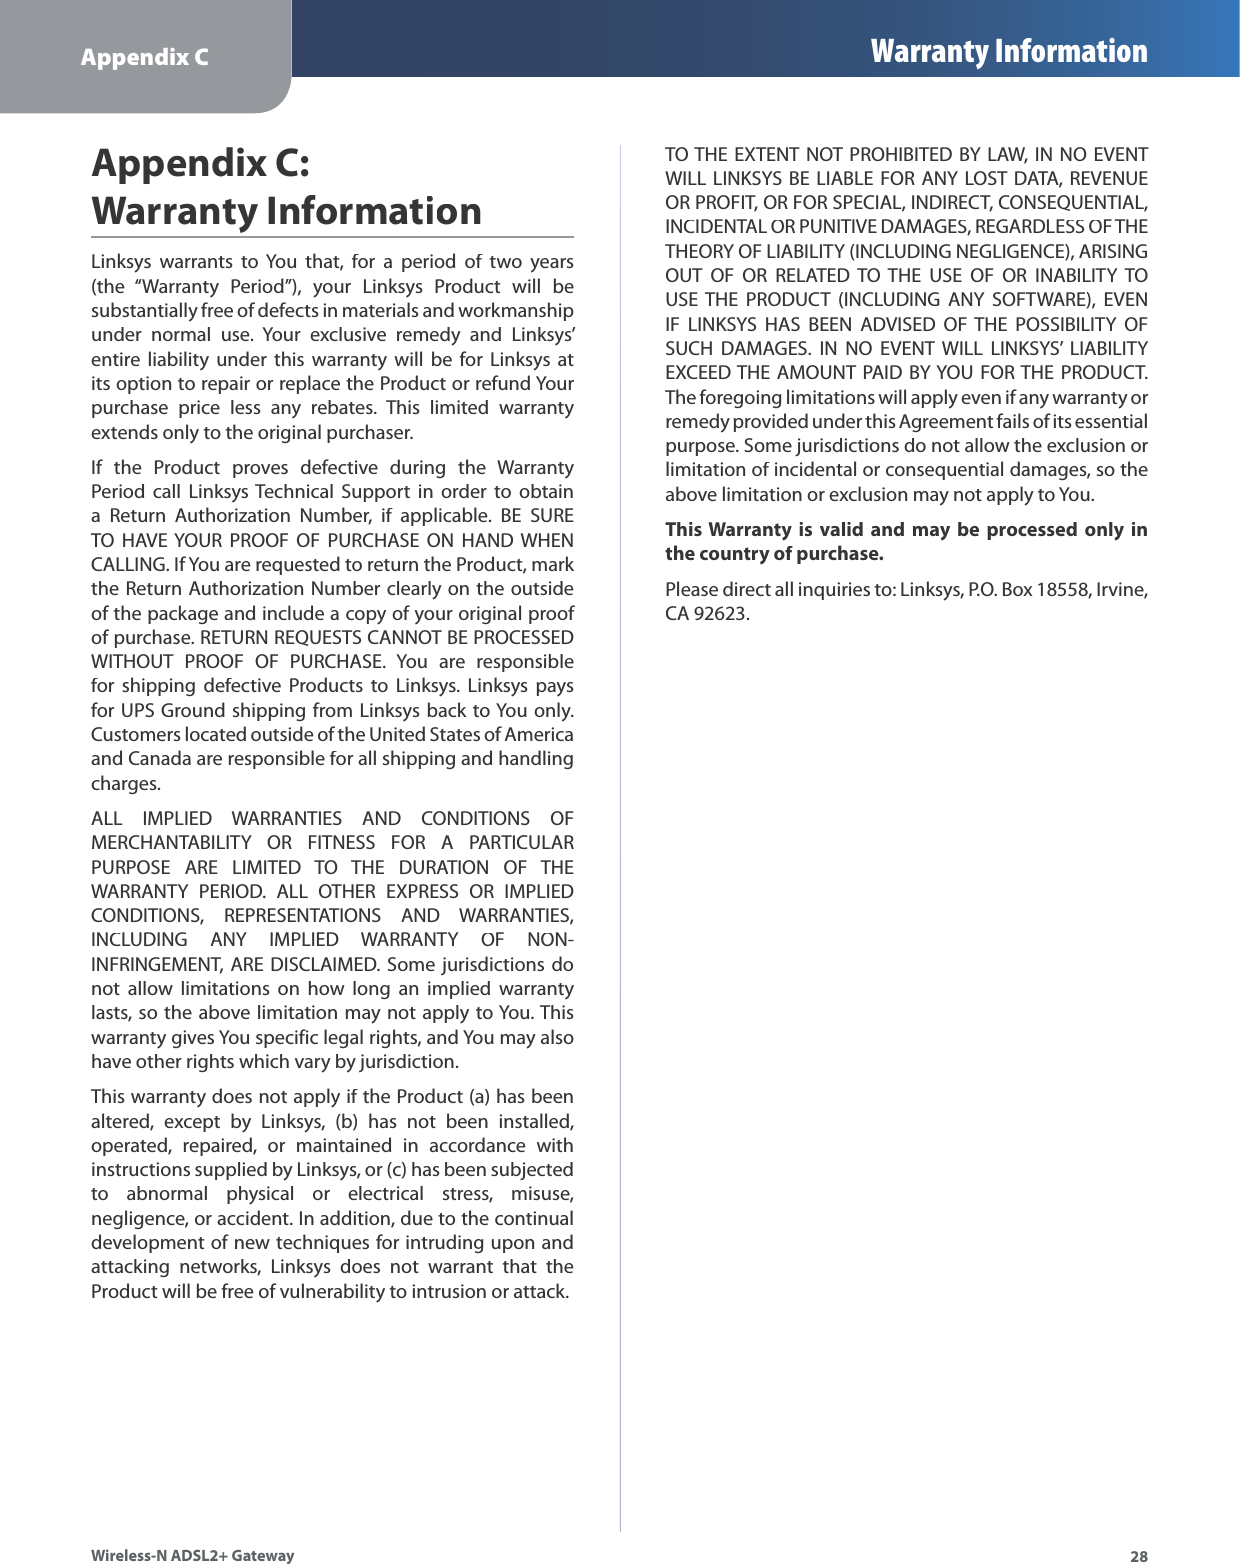 Appendix C Warranty Information28Wireless-N ADSL2+ GatewayLinksys warrants to You that, for a period of two years (the “Warranty Period”), your Linksys Product will besubstantially free of defects in materials and workmanship under normal use. Your exclusive remedy and Linksys’ entire liability under this warranty will be for Linksys atits option to repair or replace the Product or refund Your purchase price less any rebates. This limited warrantyextends only to the original purchaser.If the Product proves defective during the WarrantyPeriod call Linksys Technical Support in order to obtaina Return Authorization Number, if applicable. BE SURETO HAVE YOUR PROOF OF PURCHASE ON HAND WHEN CALLING. If You are requested to return the Product, mark the Return Authorization Number clearly on the outside of the package and include a copy of your original proof of purchase. RETURN REQUESTS CANNOT BE PROCESSED WITHOUT PROOF OF PURCHASE. You are responsible for shipping defective Products to Linksys. Linksys pays for UPS Ground shipping from Linksys back to You only.Customers located outside of the United States of America and Canada are responsible for all shipping and handling charges.ALL IMPLIED WARRANTIES AND CONDITIONS OFMERCHANTABILITY OR FITNESS FOR A PARTICULAR PURPOSE ARE LIMITED TO THE DURATION OF THE WARRANTY PERIOD. ALL OTHER EXPRESS OR IMPLIEDCONDITIONS, REPRESENTATIONS AND WARRANTIES, INCLUDING ANY IMPLIED WARRANTY OF NON-INFRINGEMENT, ARE DISCLAIMED. Some jurisdictions do not allow limitations on how long an implied warrantylasts, so the above limitation may not apply to You. This warranty gives You specific legal rights, and You may also have other rights which vary by jurisdiction.This warranty does not apply if the Product (a) has been altered, except by Linksys, (b) has not been installed,operated, repaired, or maintained in accordance with instructions supplied by Linksys, or (c) has been subjected to abnormal physical or electrical stress, misuse, negligence, or accident. In addition, due to the continual development of new techniques for intruding upon and attacking networks, Linksys does not warrant that the Product will be free of vulnerability to intrusion or attack.TO THE EXTENT NOT PROHIBITED BY LAW, IN NO EVENT WILL LINKSYS BE LIABLE FOR ANY LOST DATA, REVENUEOR PROFIT, OR FOR SPECIAL, INDIRECT, CONSEQUENTIAL, INCIDENTAL OR PUNITIVE DAMAGES, REGARDLESS OF THE THEORY OF LIABILITY (INCLUDING NEGLIGENCE), ARISING OUT OF OR RELATED TO THE USE OF OR INABILITY TO USE THE PRODUCT (INCLUDING ANY SOFTWARE), EVEN IF LINKSYS HAS BEEN ADVISED OF THE POSSIBILITY OF SUCH DAMAGES. IN NO EVENT WILL LINKSYS’ LIABILITYEXCEED THE AMOUNT PAID BY YOU FOR THE PRODUCT.The foregoing limitations will apply even if any warranty or remedy provided under this Agreement fails of its essentialpurpose. Some jurisdictions do not allow the exclusion or limitation of incidental or consequential damages, so the above limitation or exclusion may not apply to You.This Warrantyis valid and may be processed onlyinthe country of purchase.Please direct all inquiries to: Linksys, P.O. Box 18558, Irvine, CA 92623.Appendix C:Warranty Information